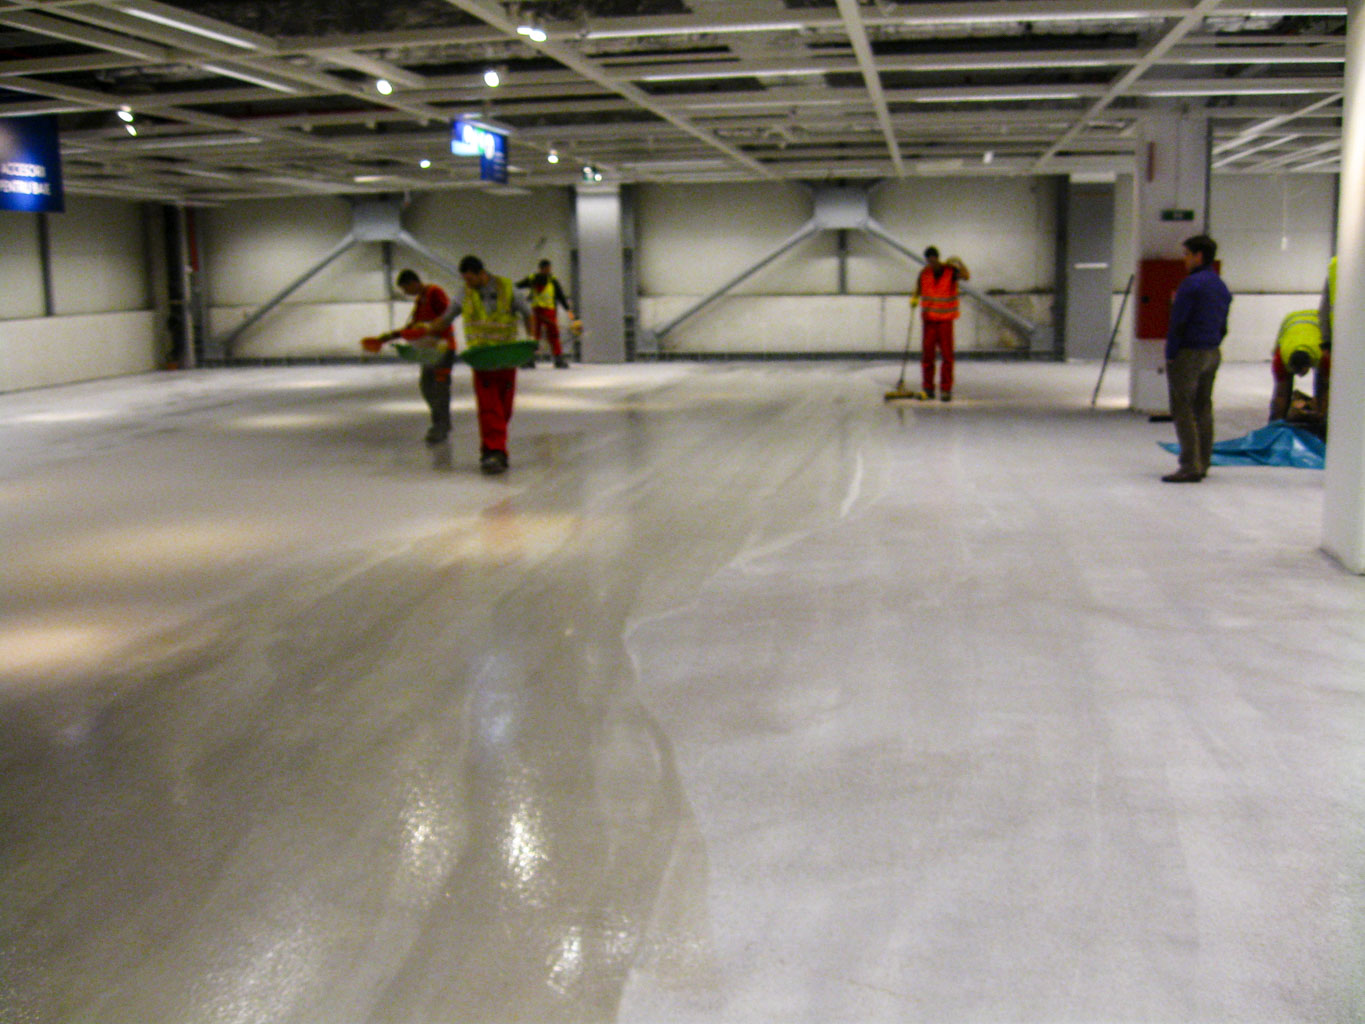 IKEA - Retail and Commercial Epoxy Flooring